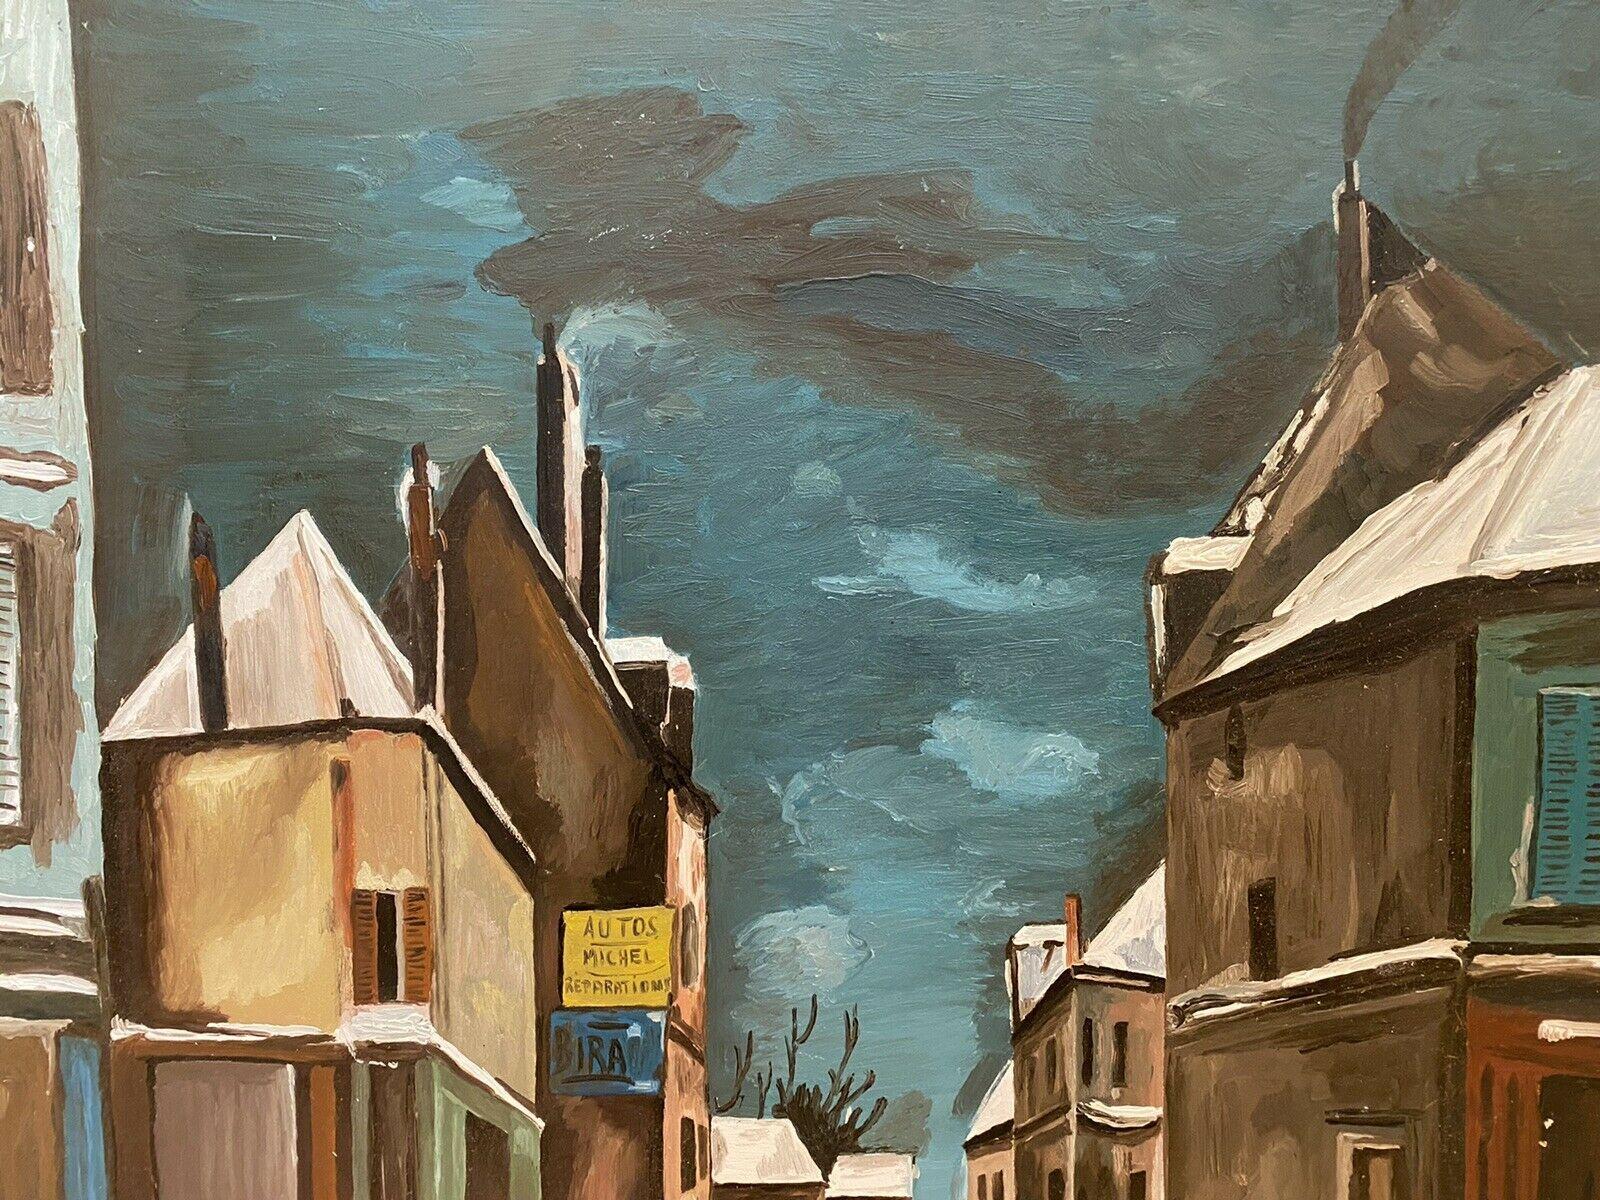 FERNAND AUDET (1923-2016) FRENCH POST-IMPRESSIONIST OIL - WINTER SNOW TOWN VIEW - Post-Impressionist Painting by Fernand Audet